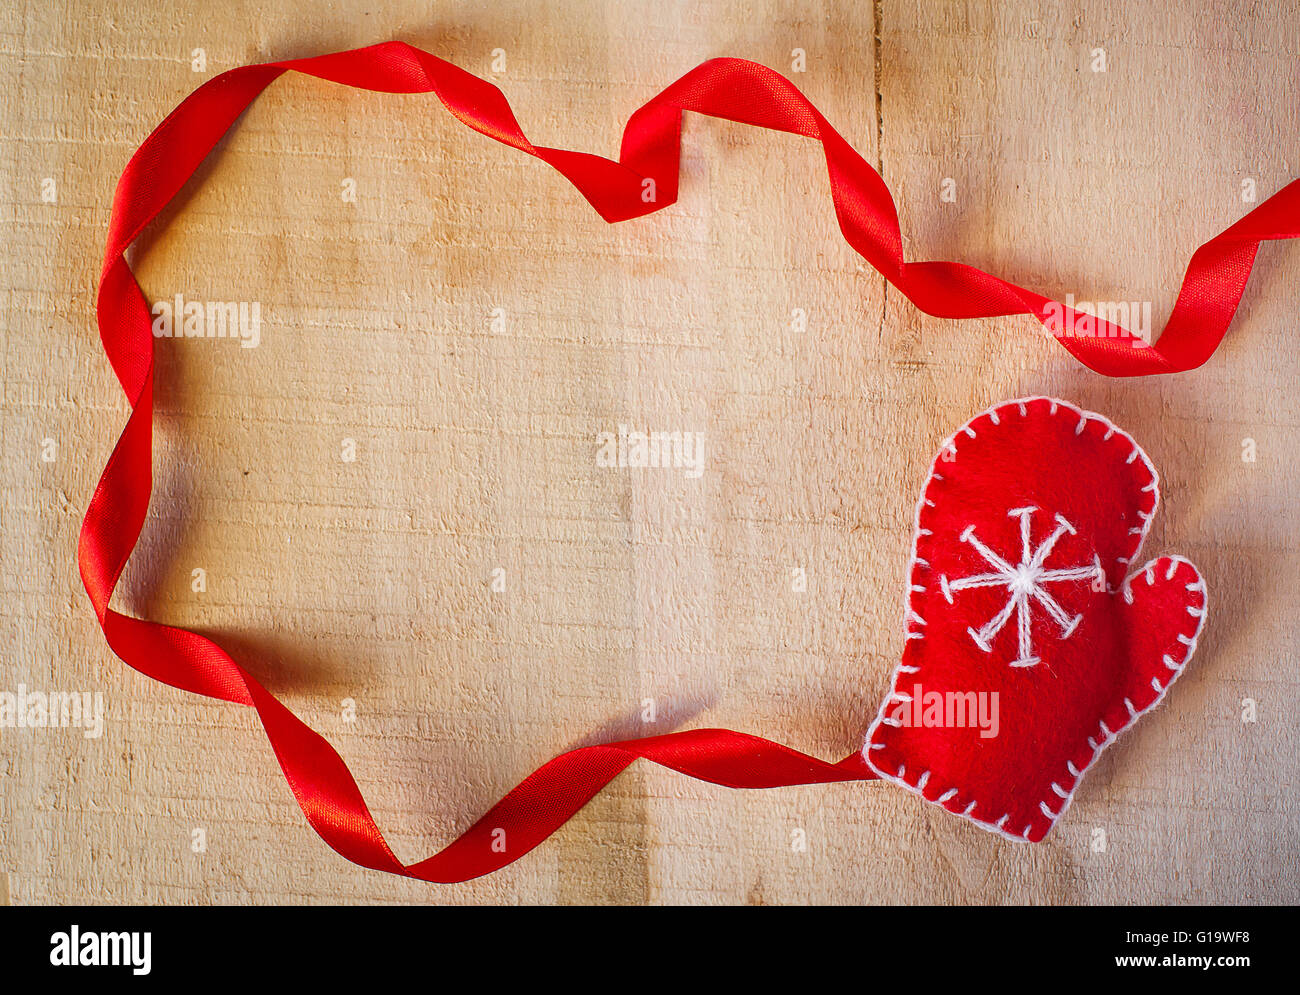 Christmas frame with Santa Claus mittens on a wooden background Stock Photo